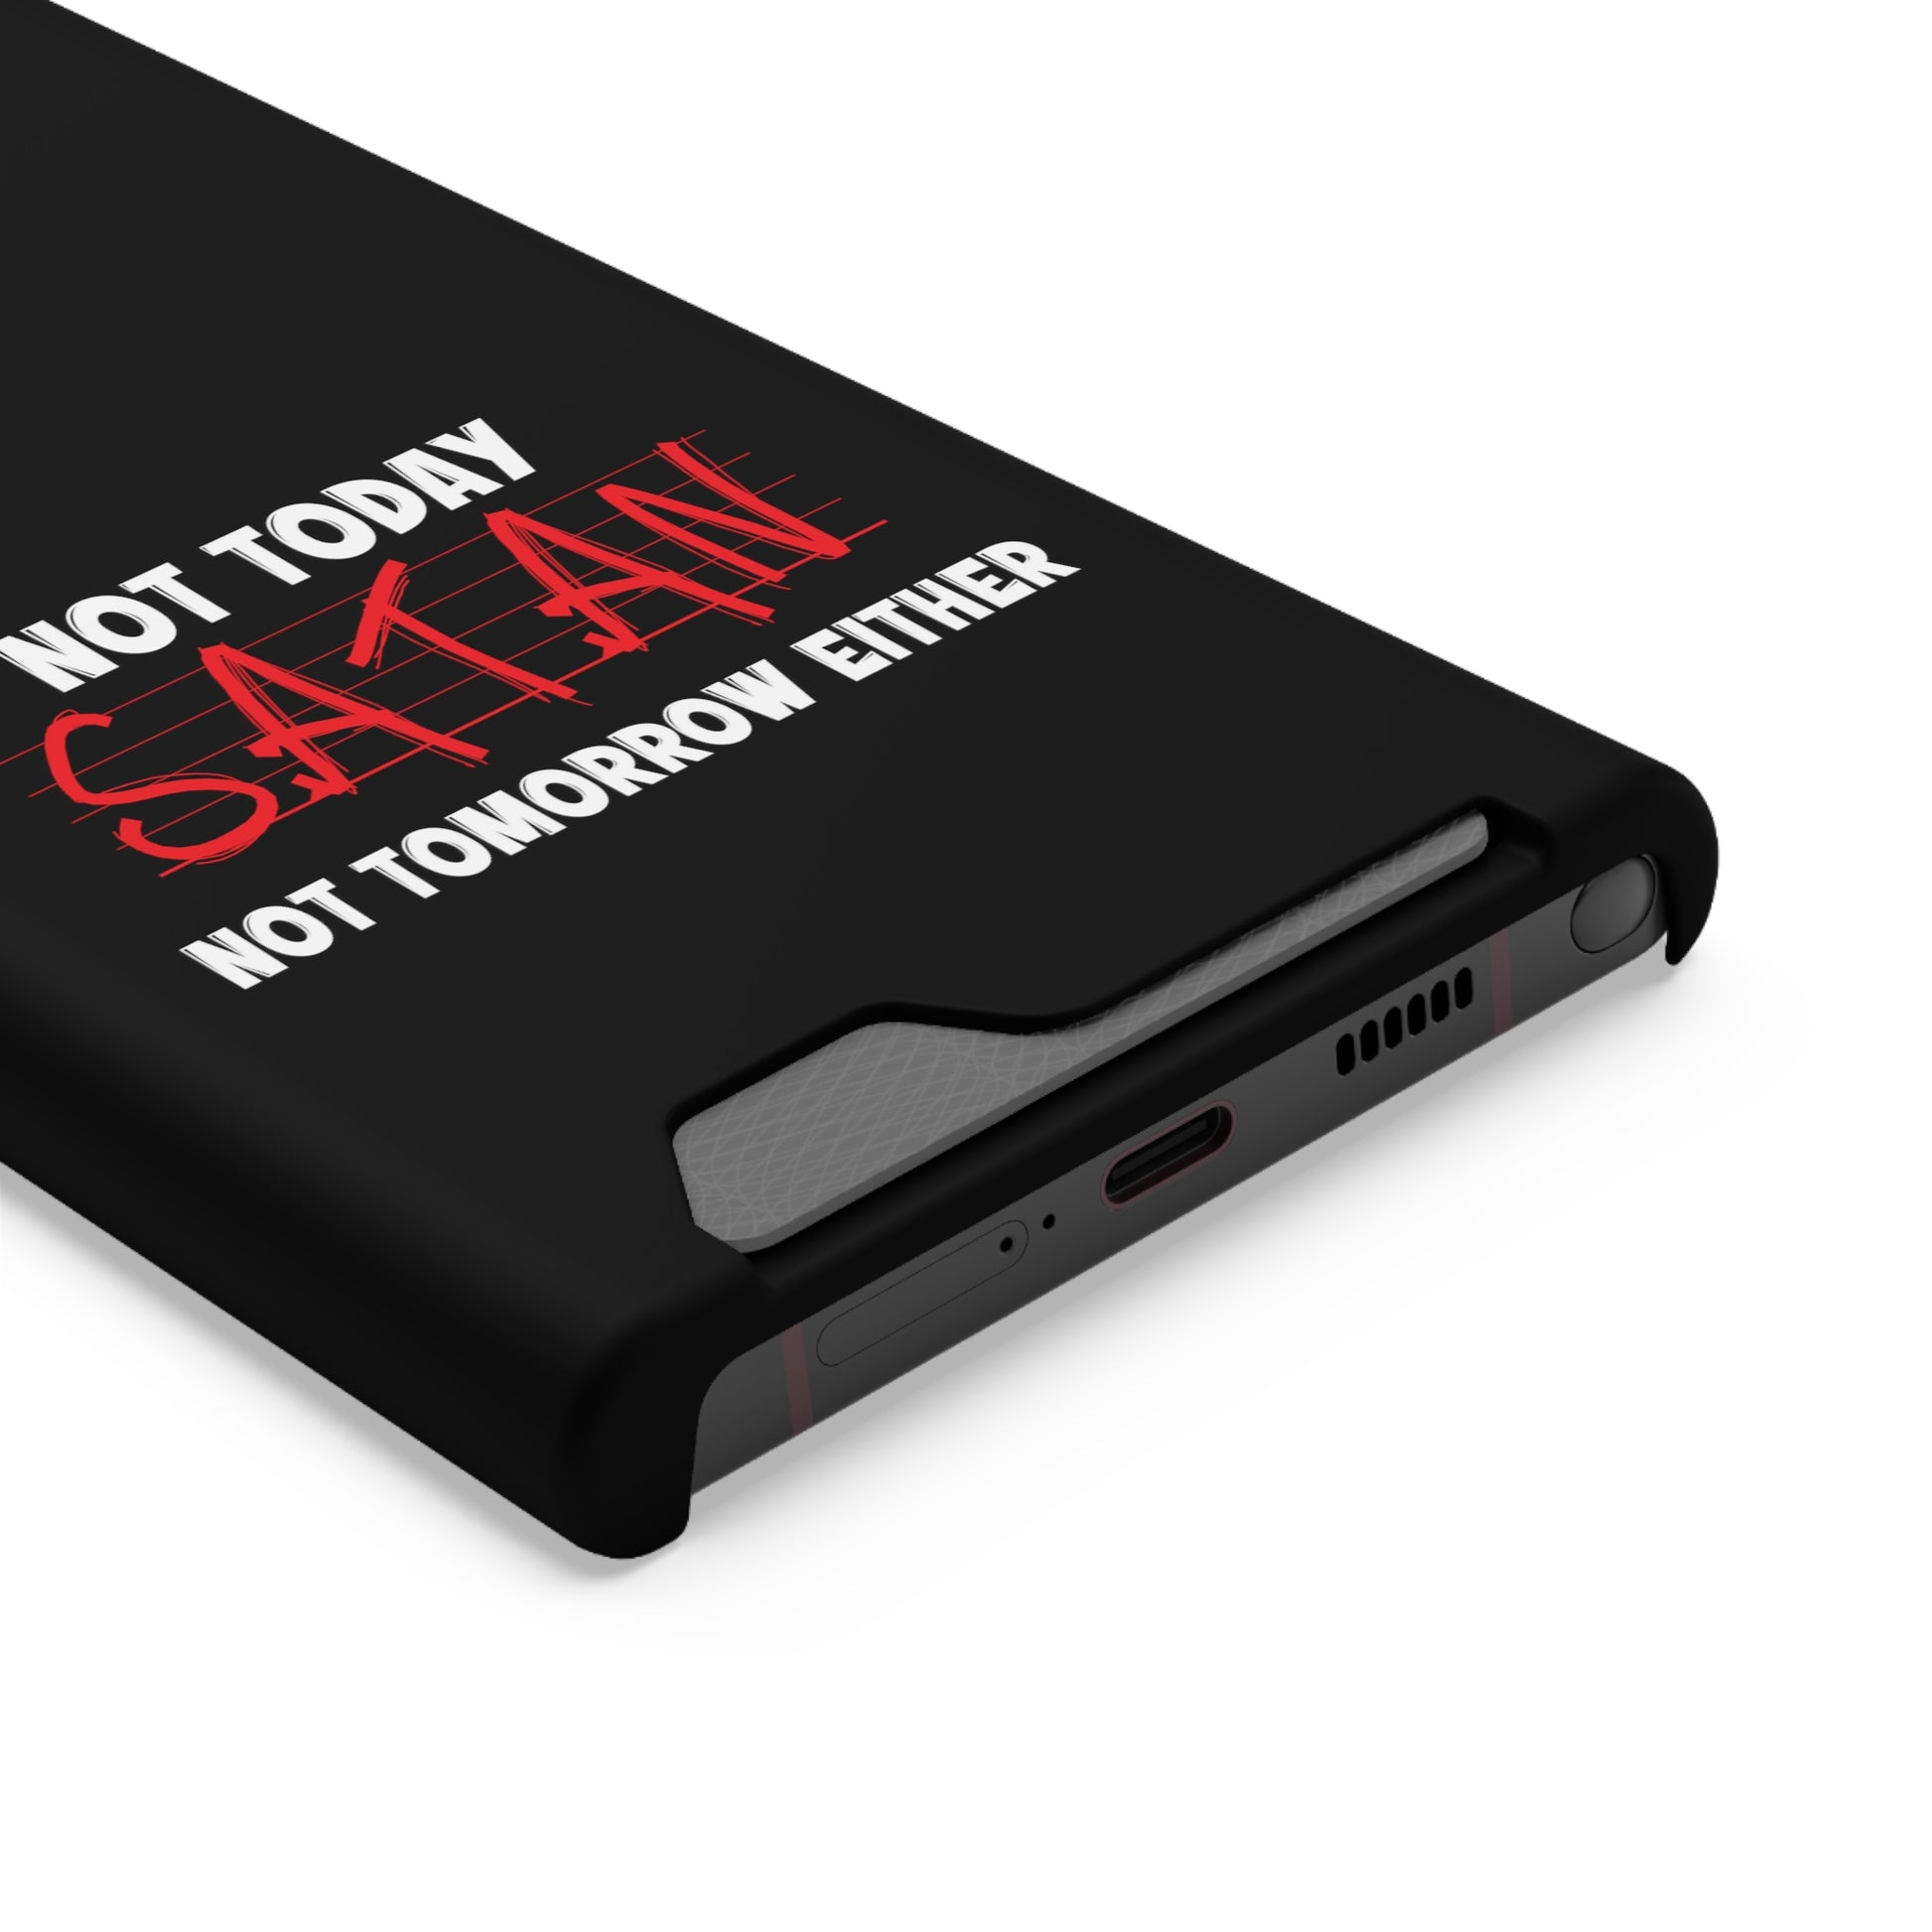 Not Today Satan Not Tomorrow Either Christian Phone Case With Card Holder Printify